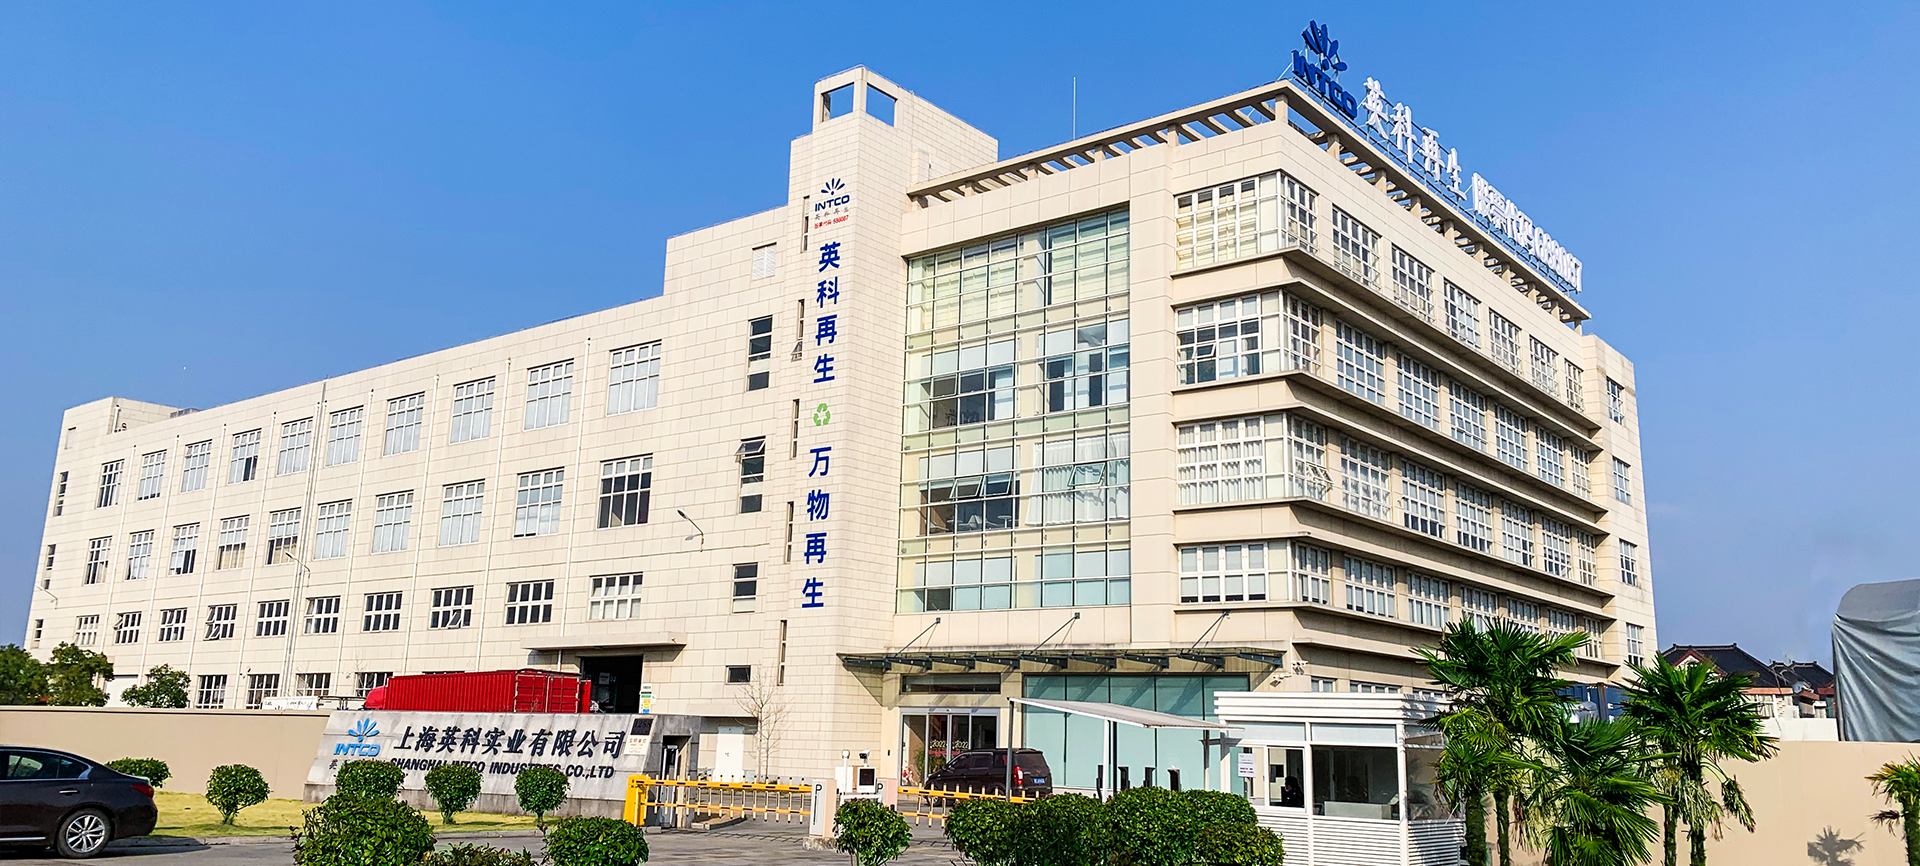 Shang Intco, the production base of recycled plastic pellets and picture frames moulding.